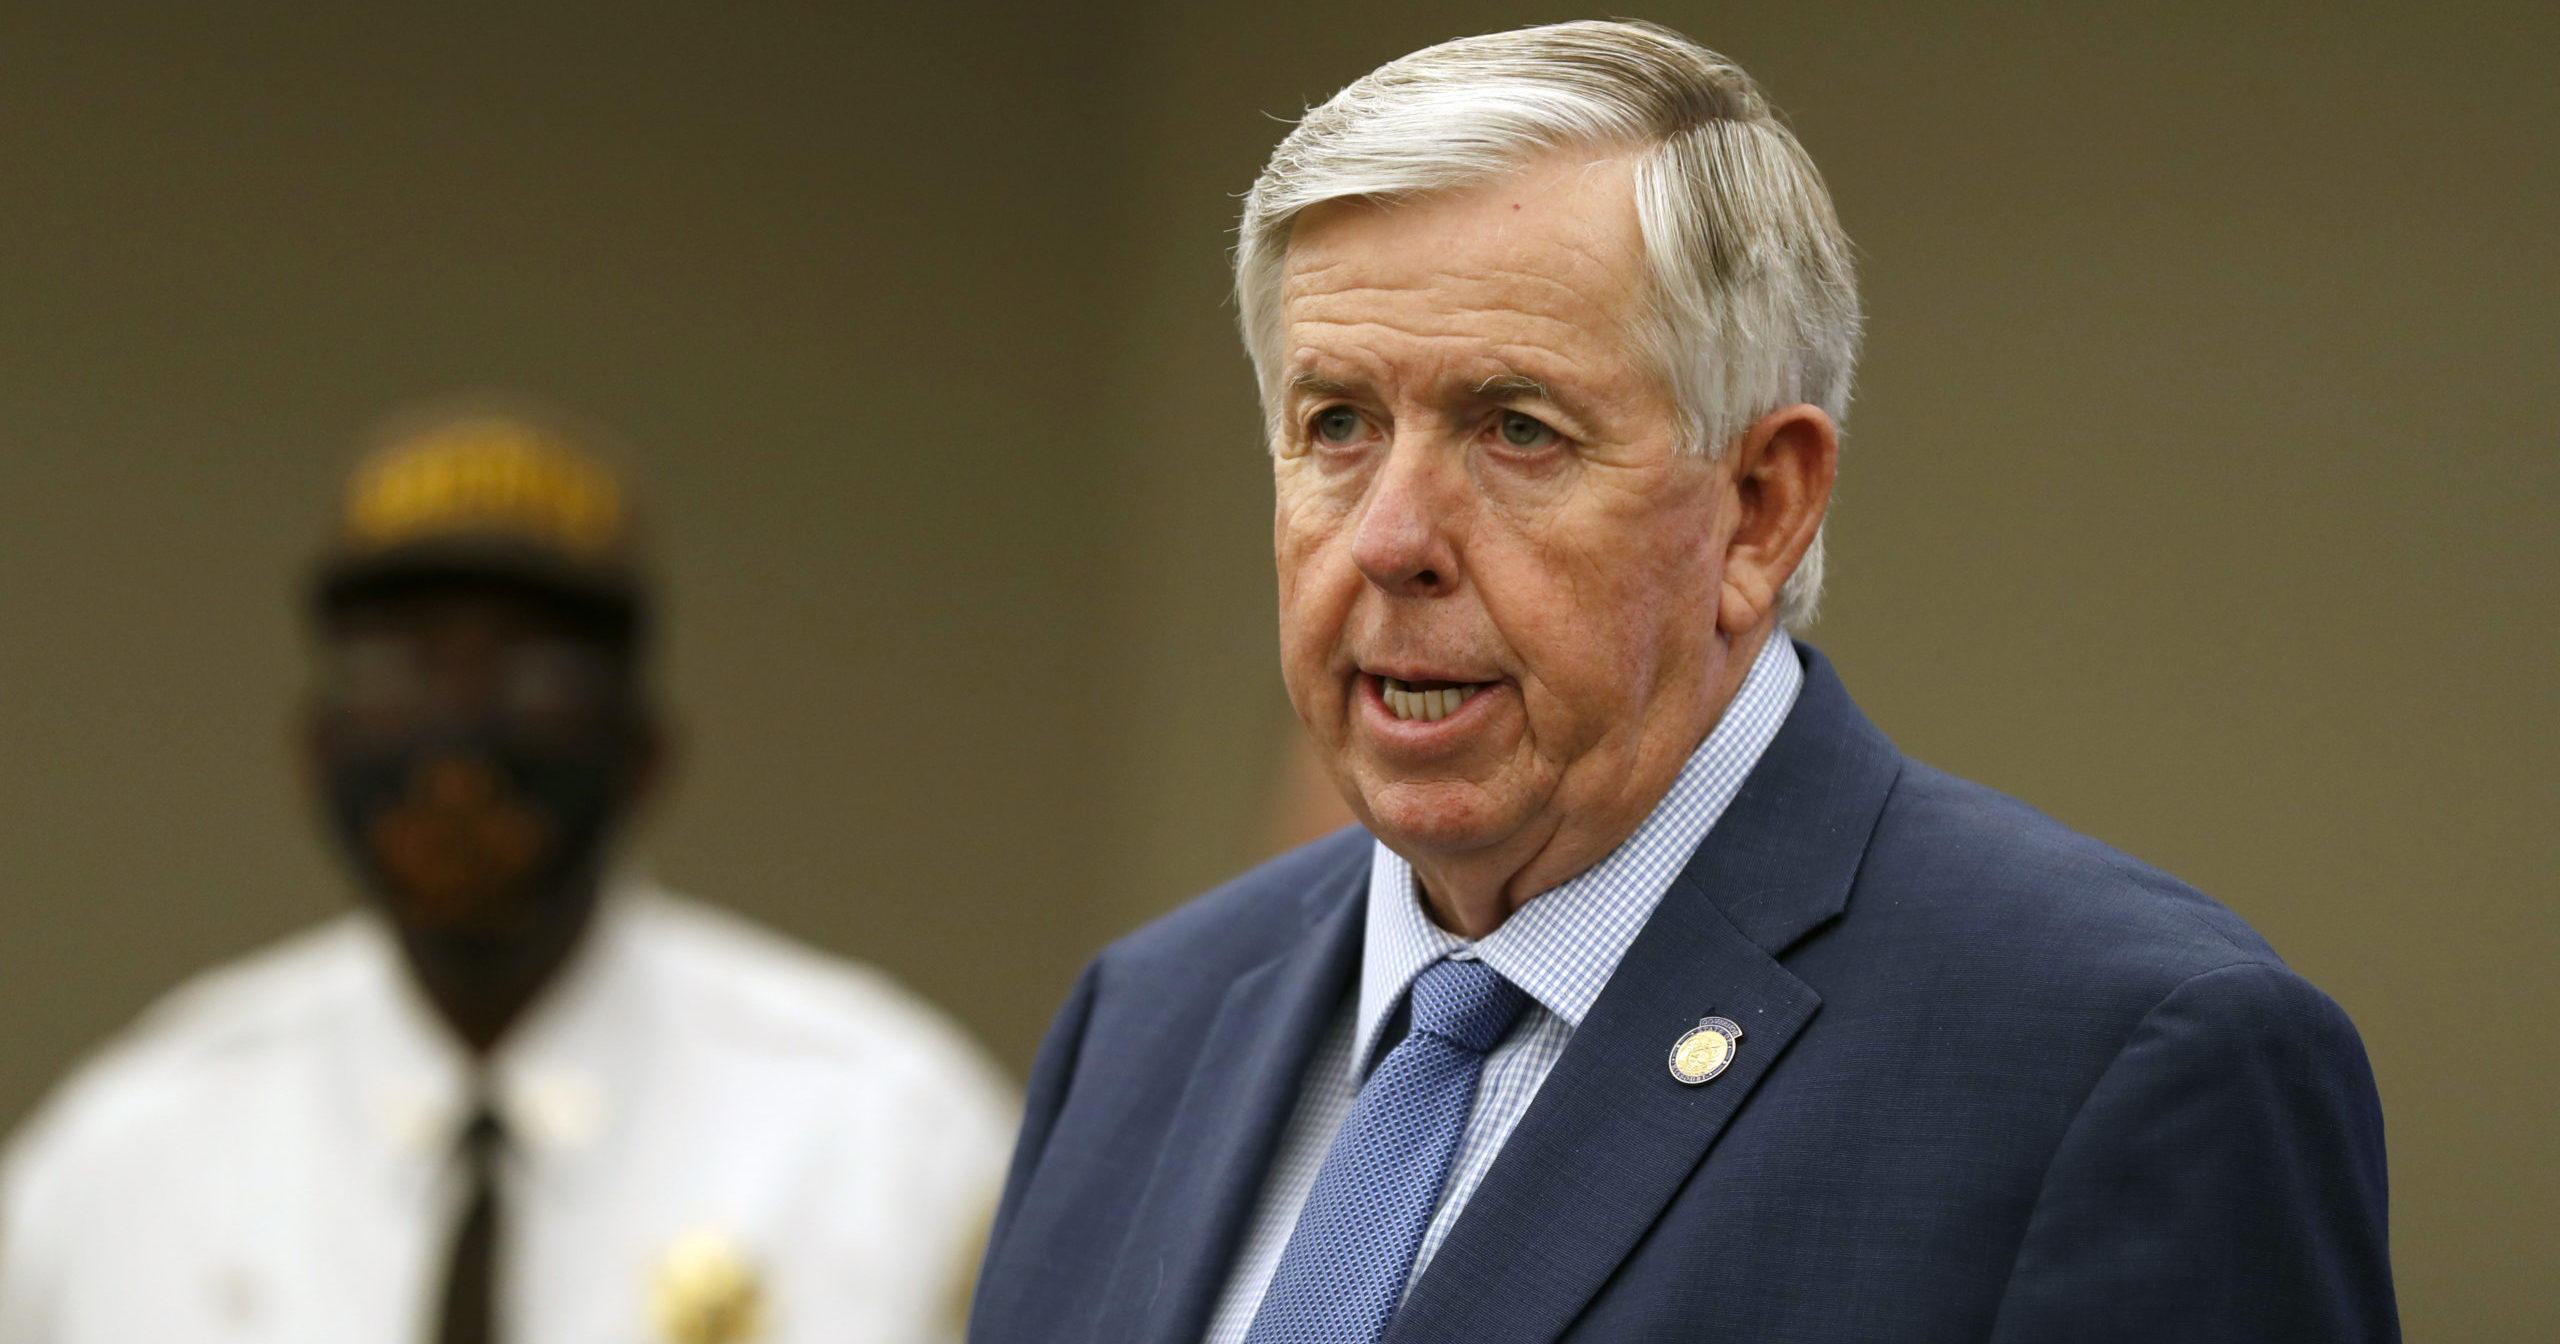 In this Aug. 6, 2020, file photo, Missouri Gov. Mike Parson speaks during a news conference in St. Louis.